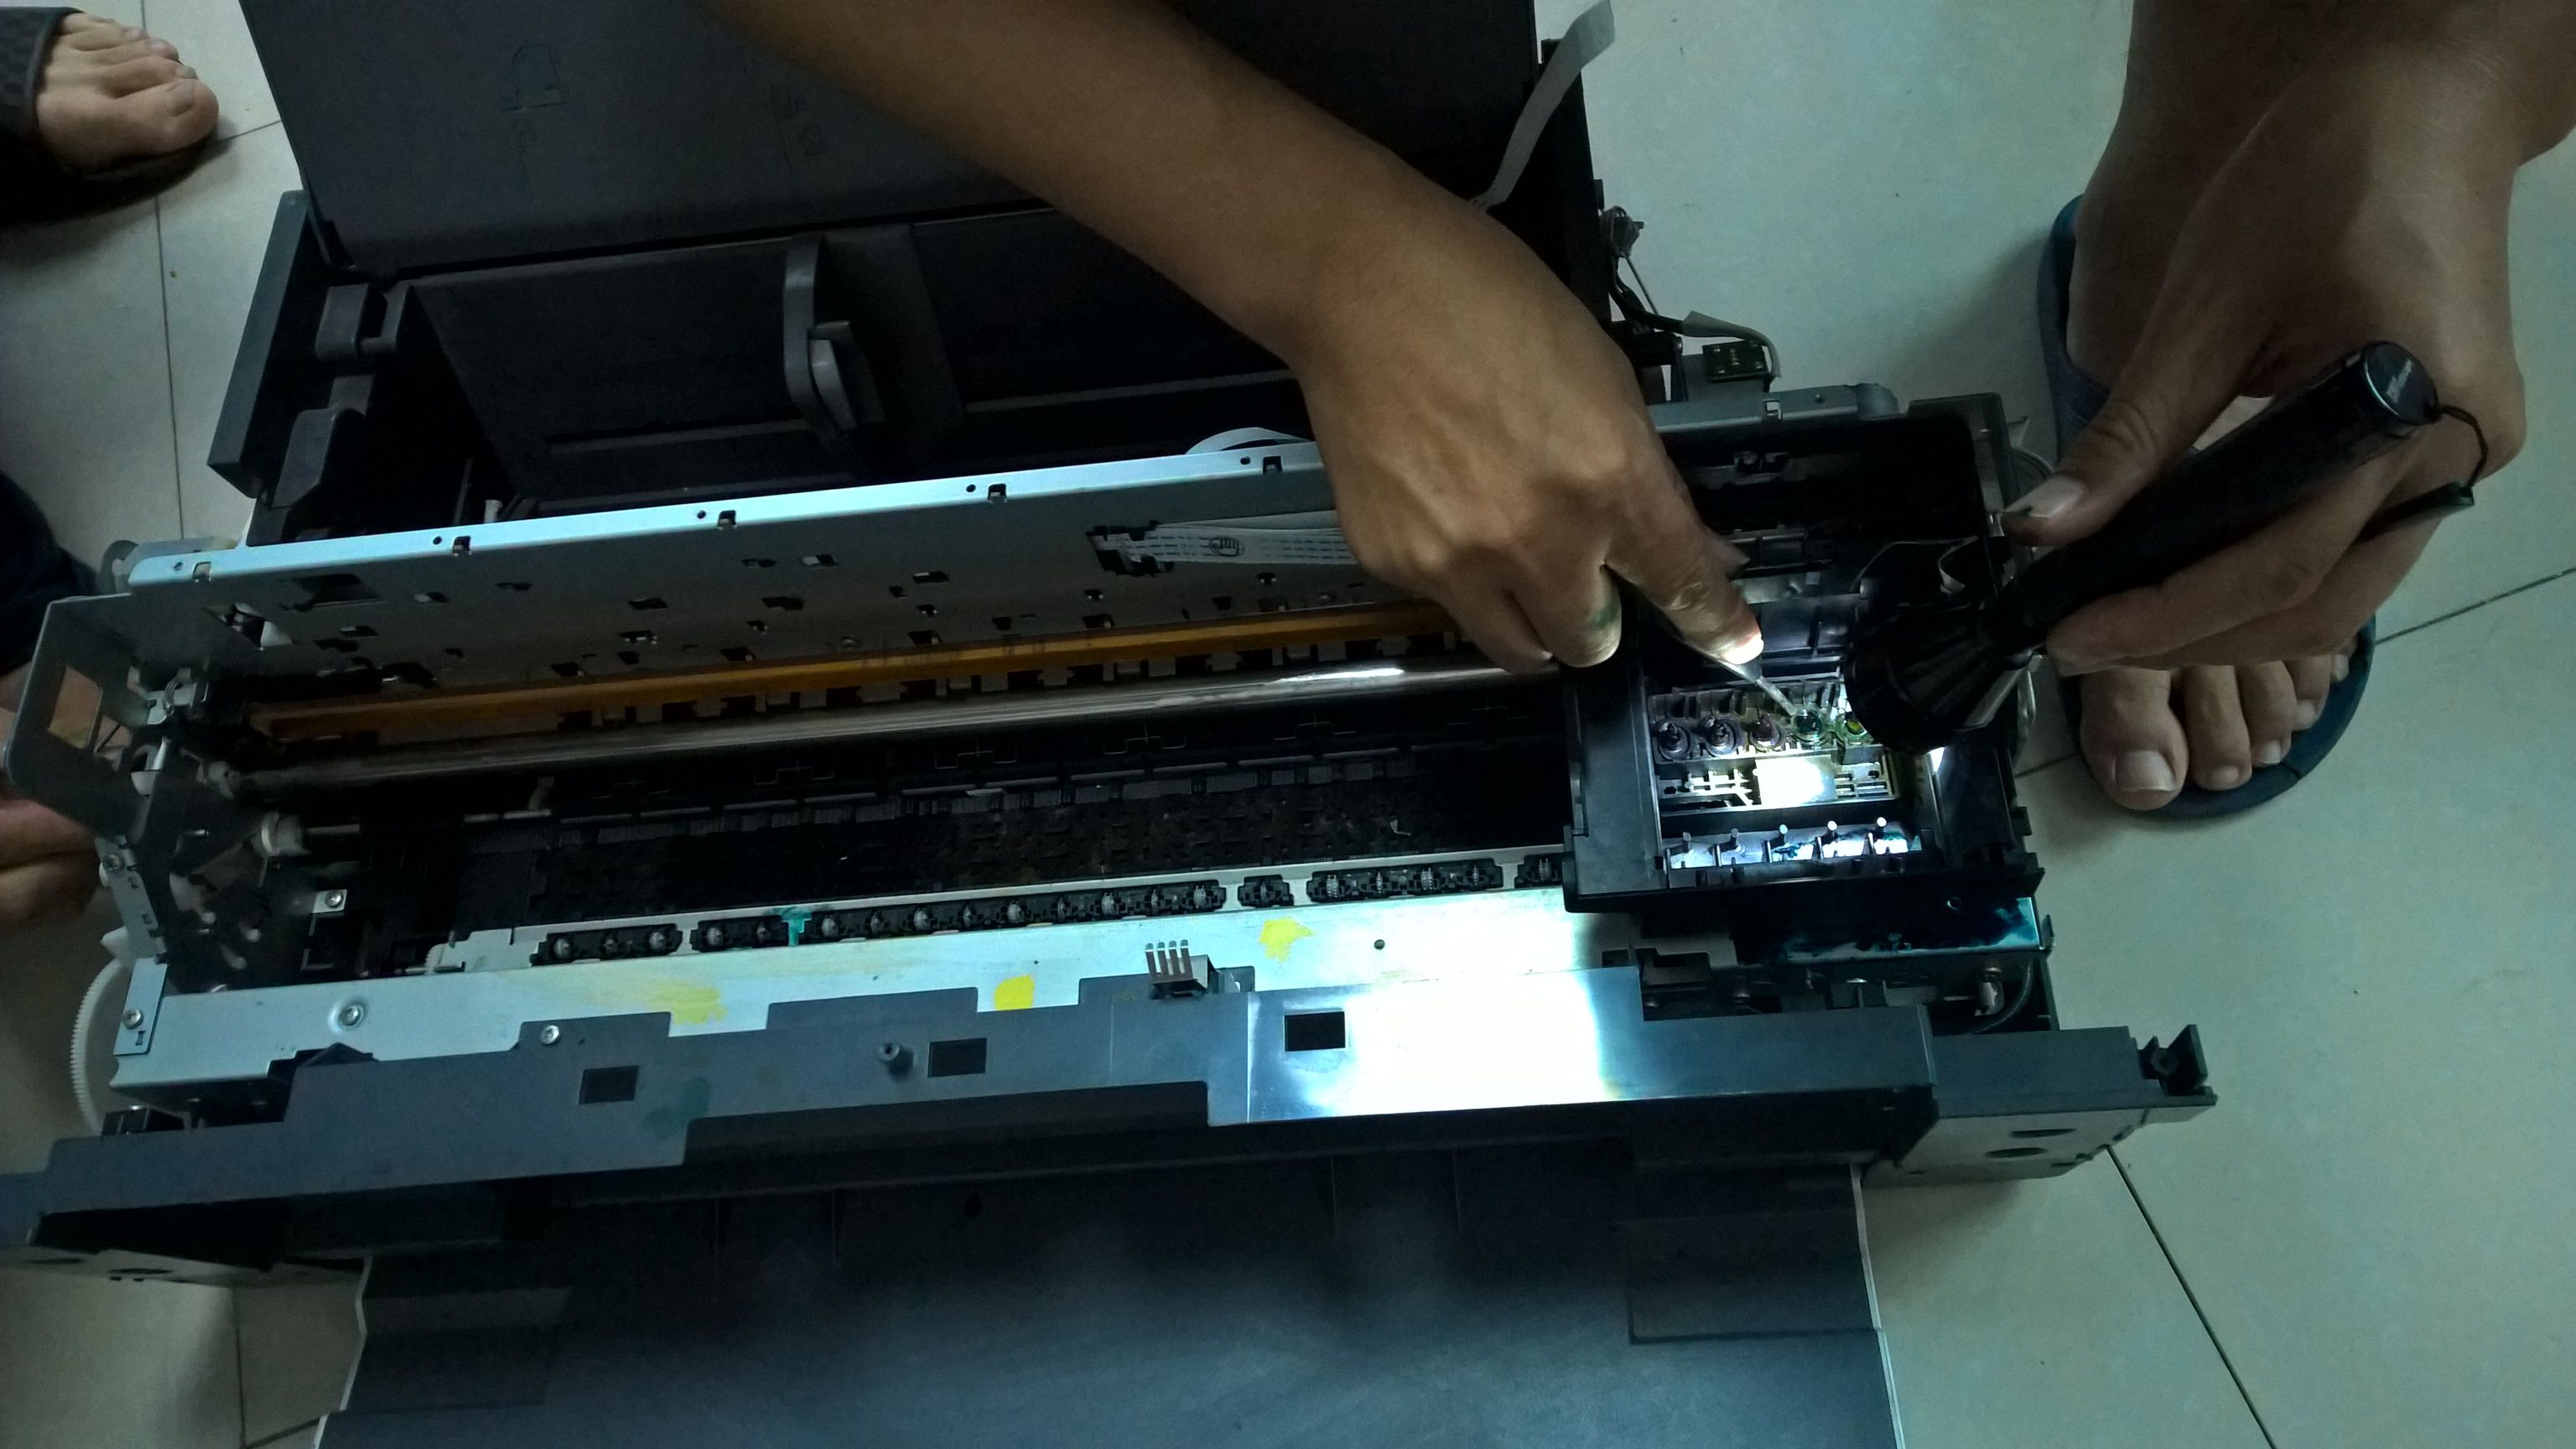 How to solve the clogging of the Epson printer print head?